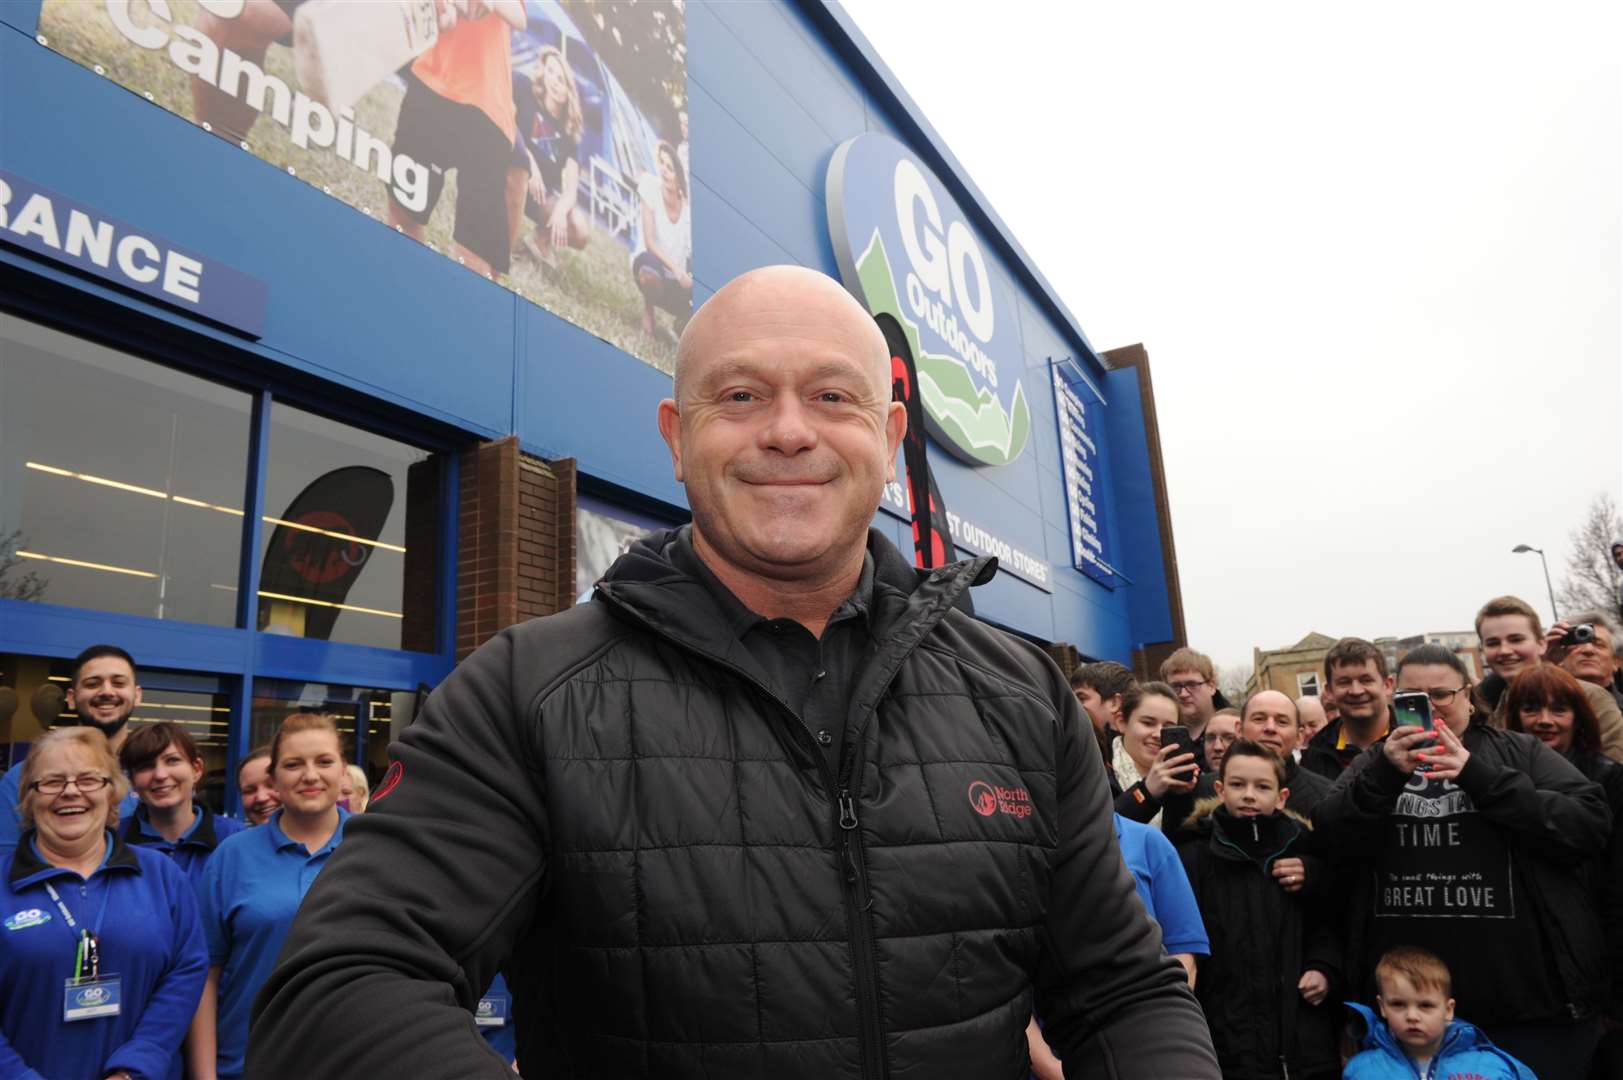 Ross Kemp opened the Go Outdoors store in Chatham in 2016